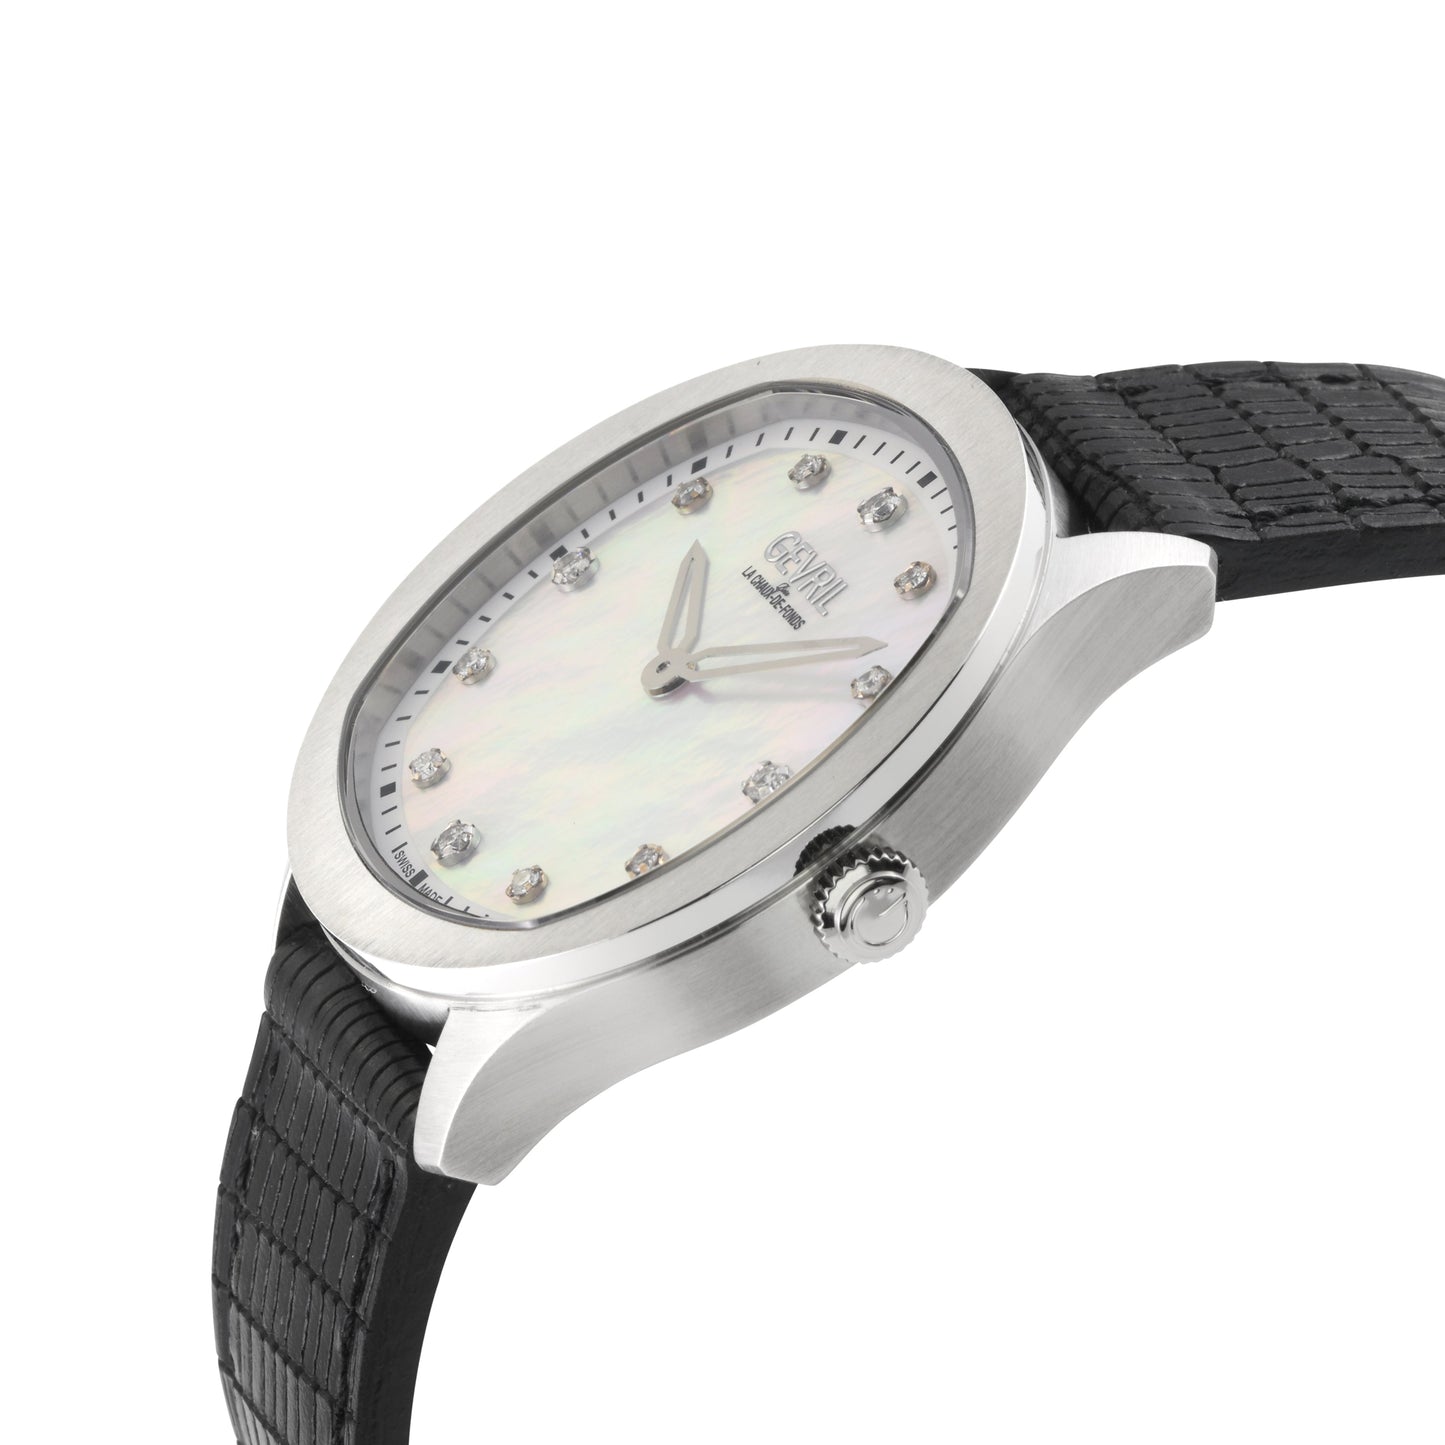 Gevril-Luxury-Swiss-Watches-Gevril Morcote Diamond-10041